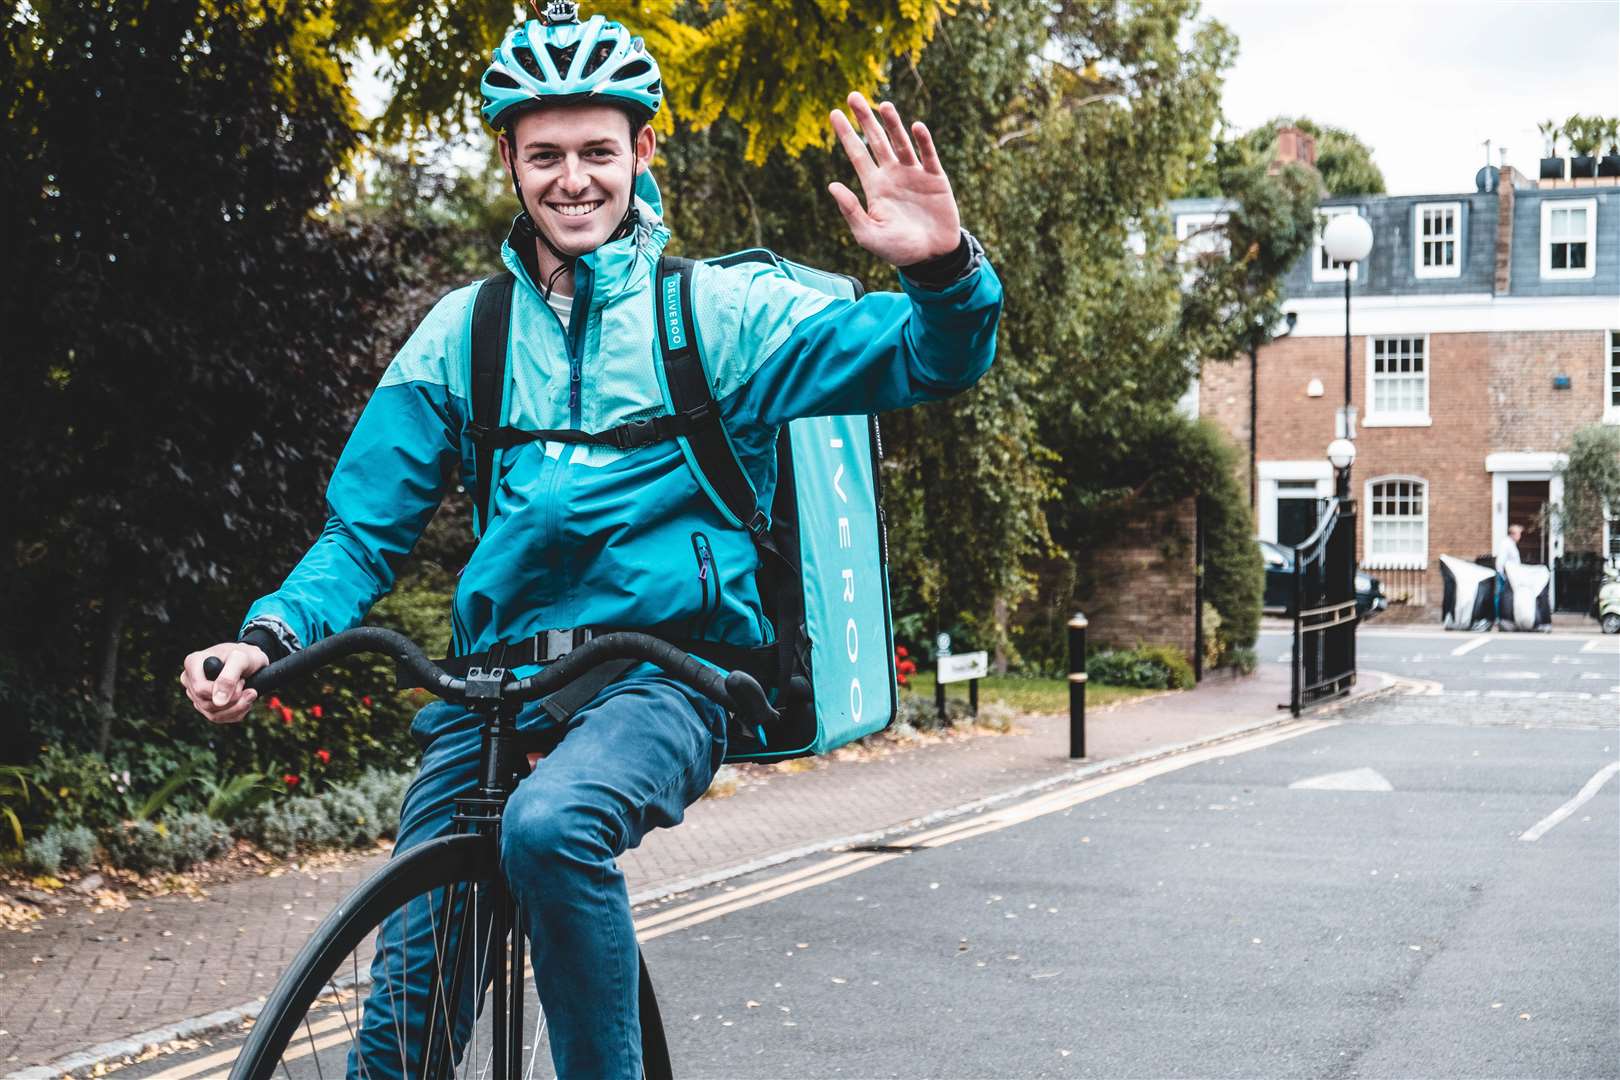 It may have no brakes, but it was all smiles for Whitstable man George Heming as he delivered food on a penny farthing